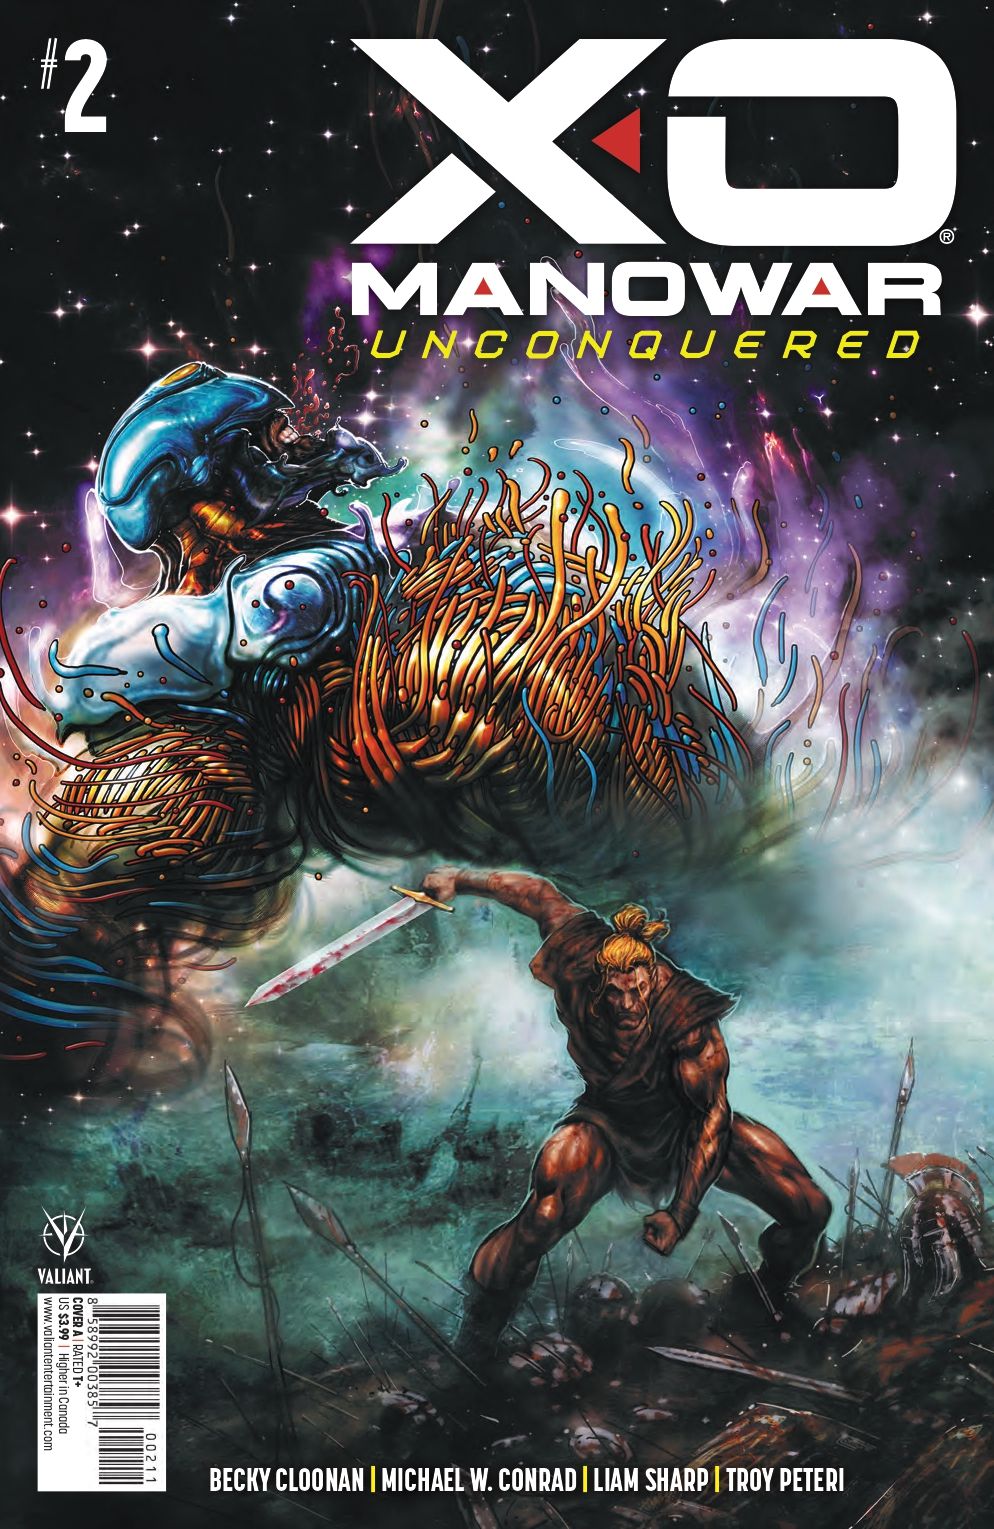 Cover A of X-O Manowar Unconquered #2